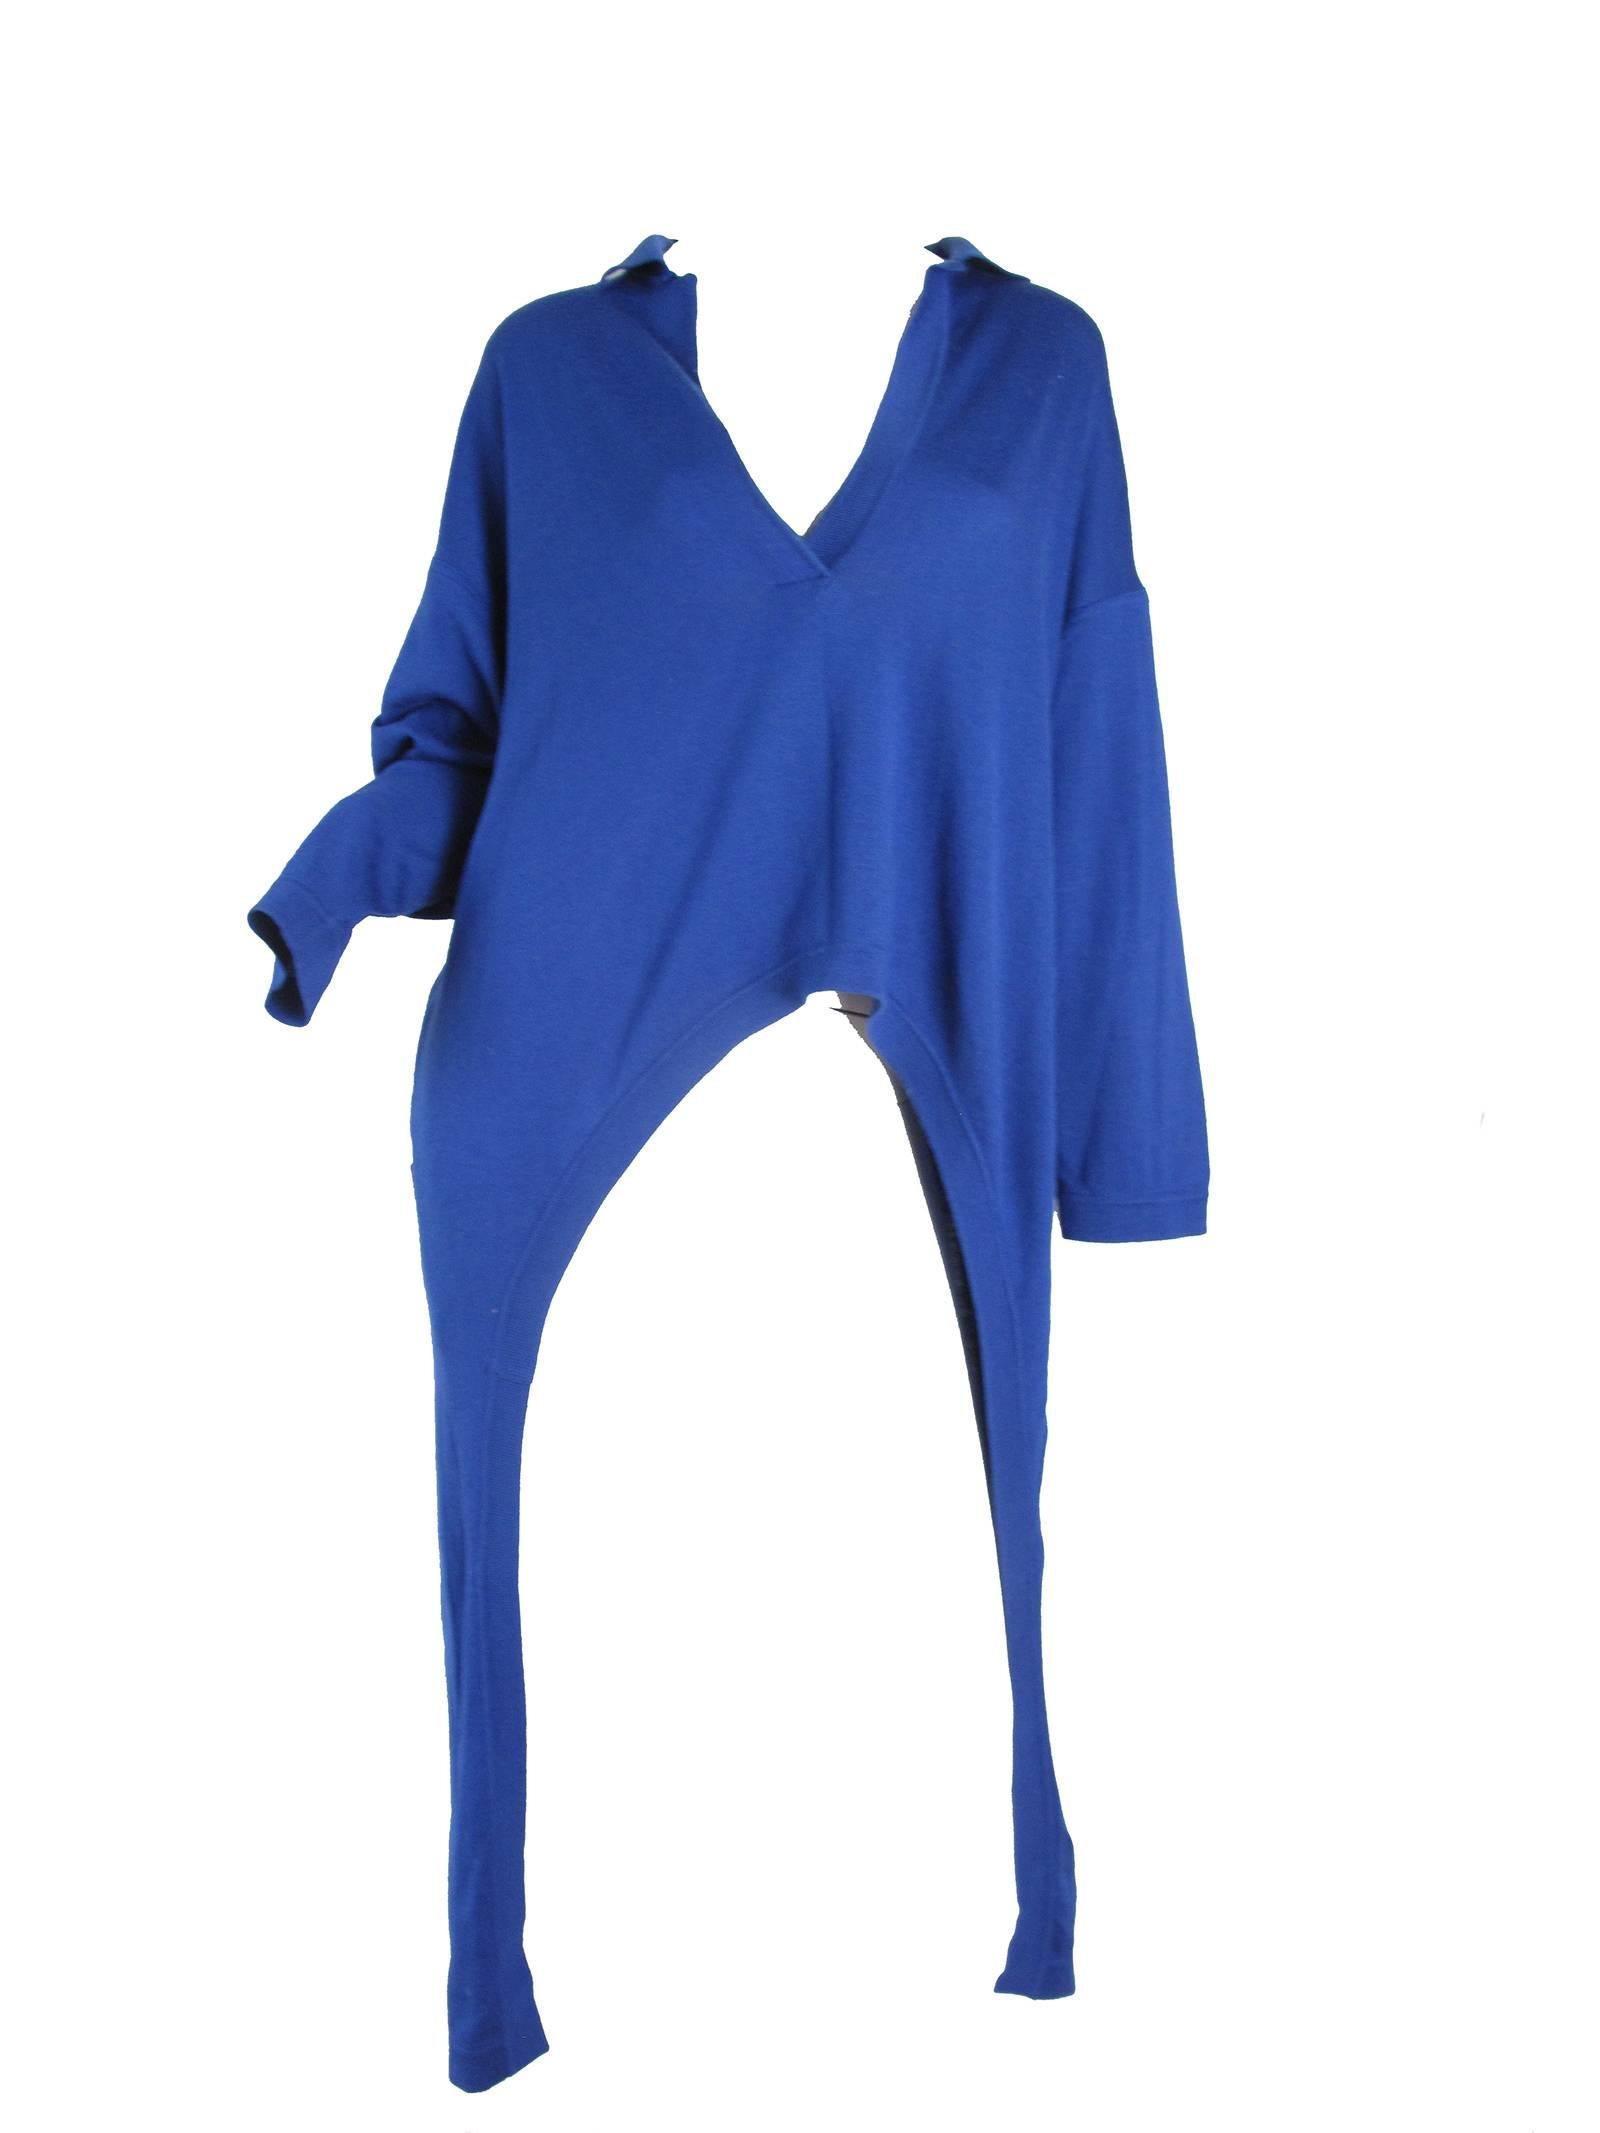 Oversized blue Italian sweater with tails.  condition: Excellent. No label. Size 40 ( mannequin is a US size 6)

We accept returns for refund, please see our terms.  We offer free ground shipping within the US